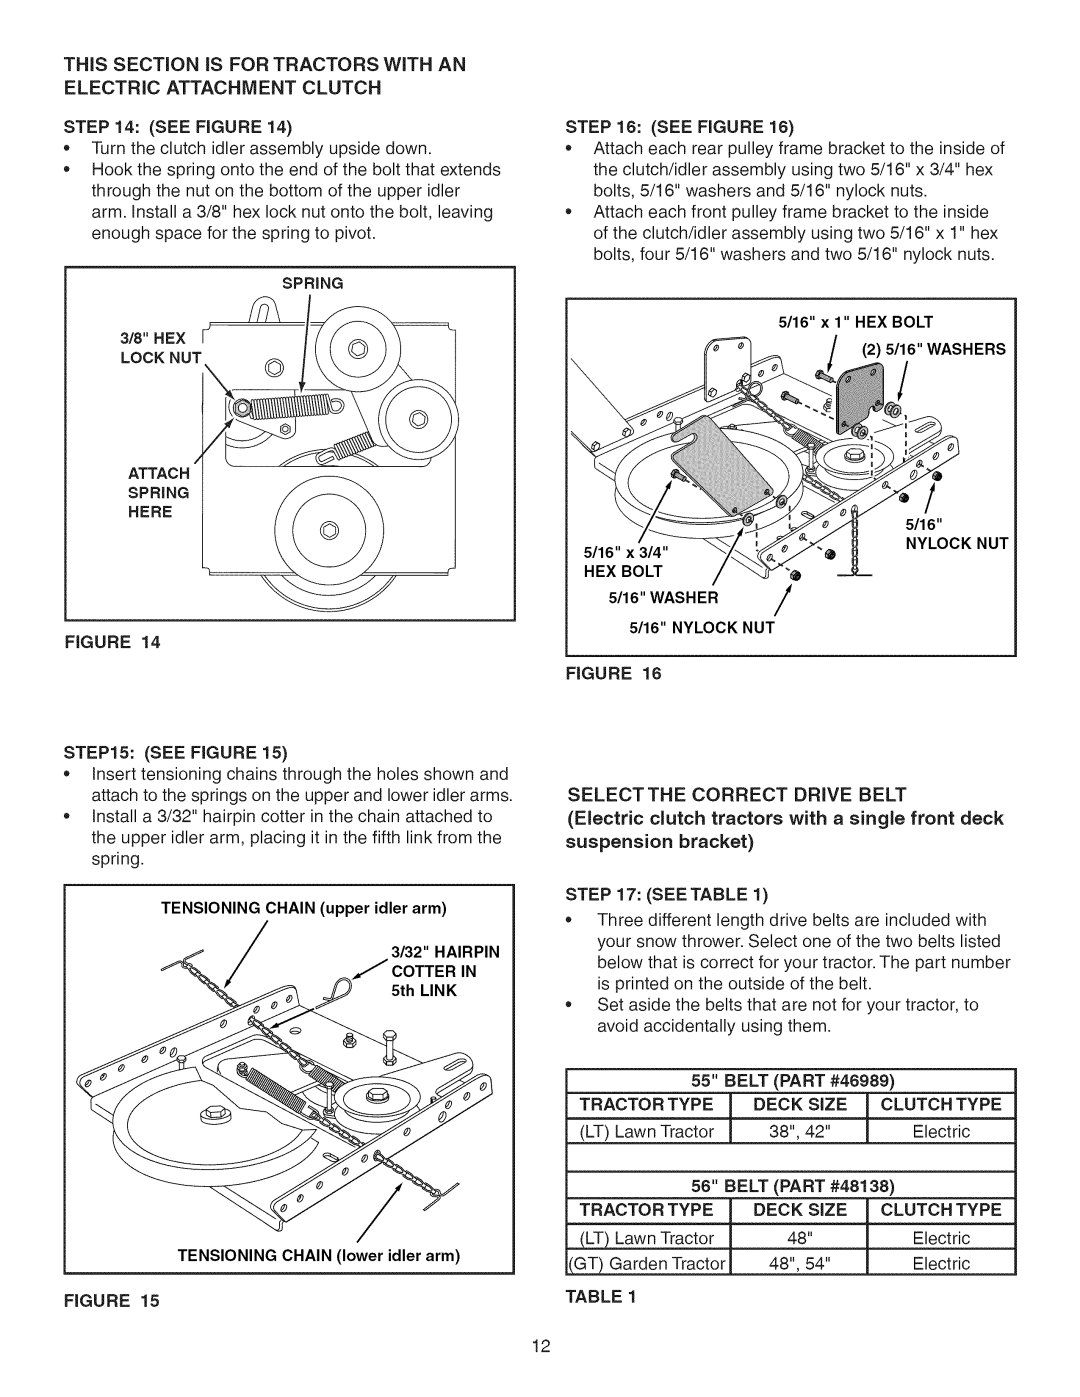 Craftsman 486.24837 manual This Section Is For Tractors With An, 5116, Nylock Nut 